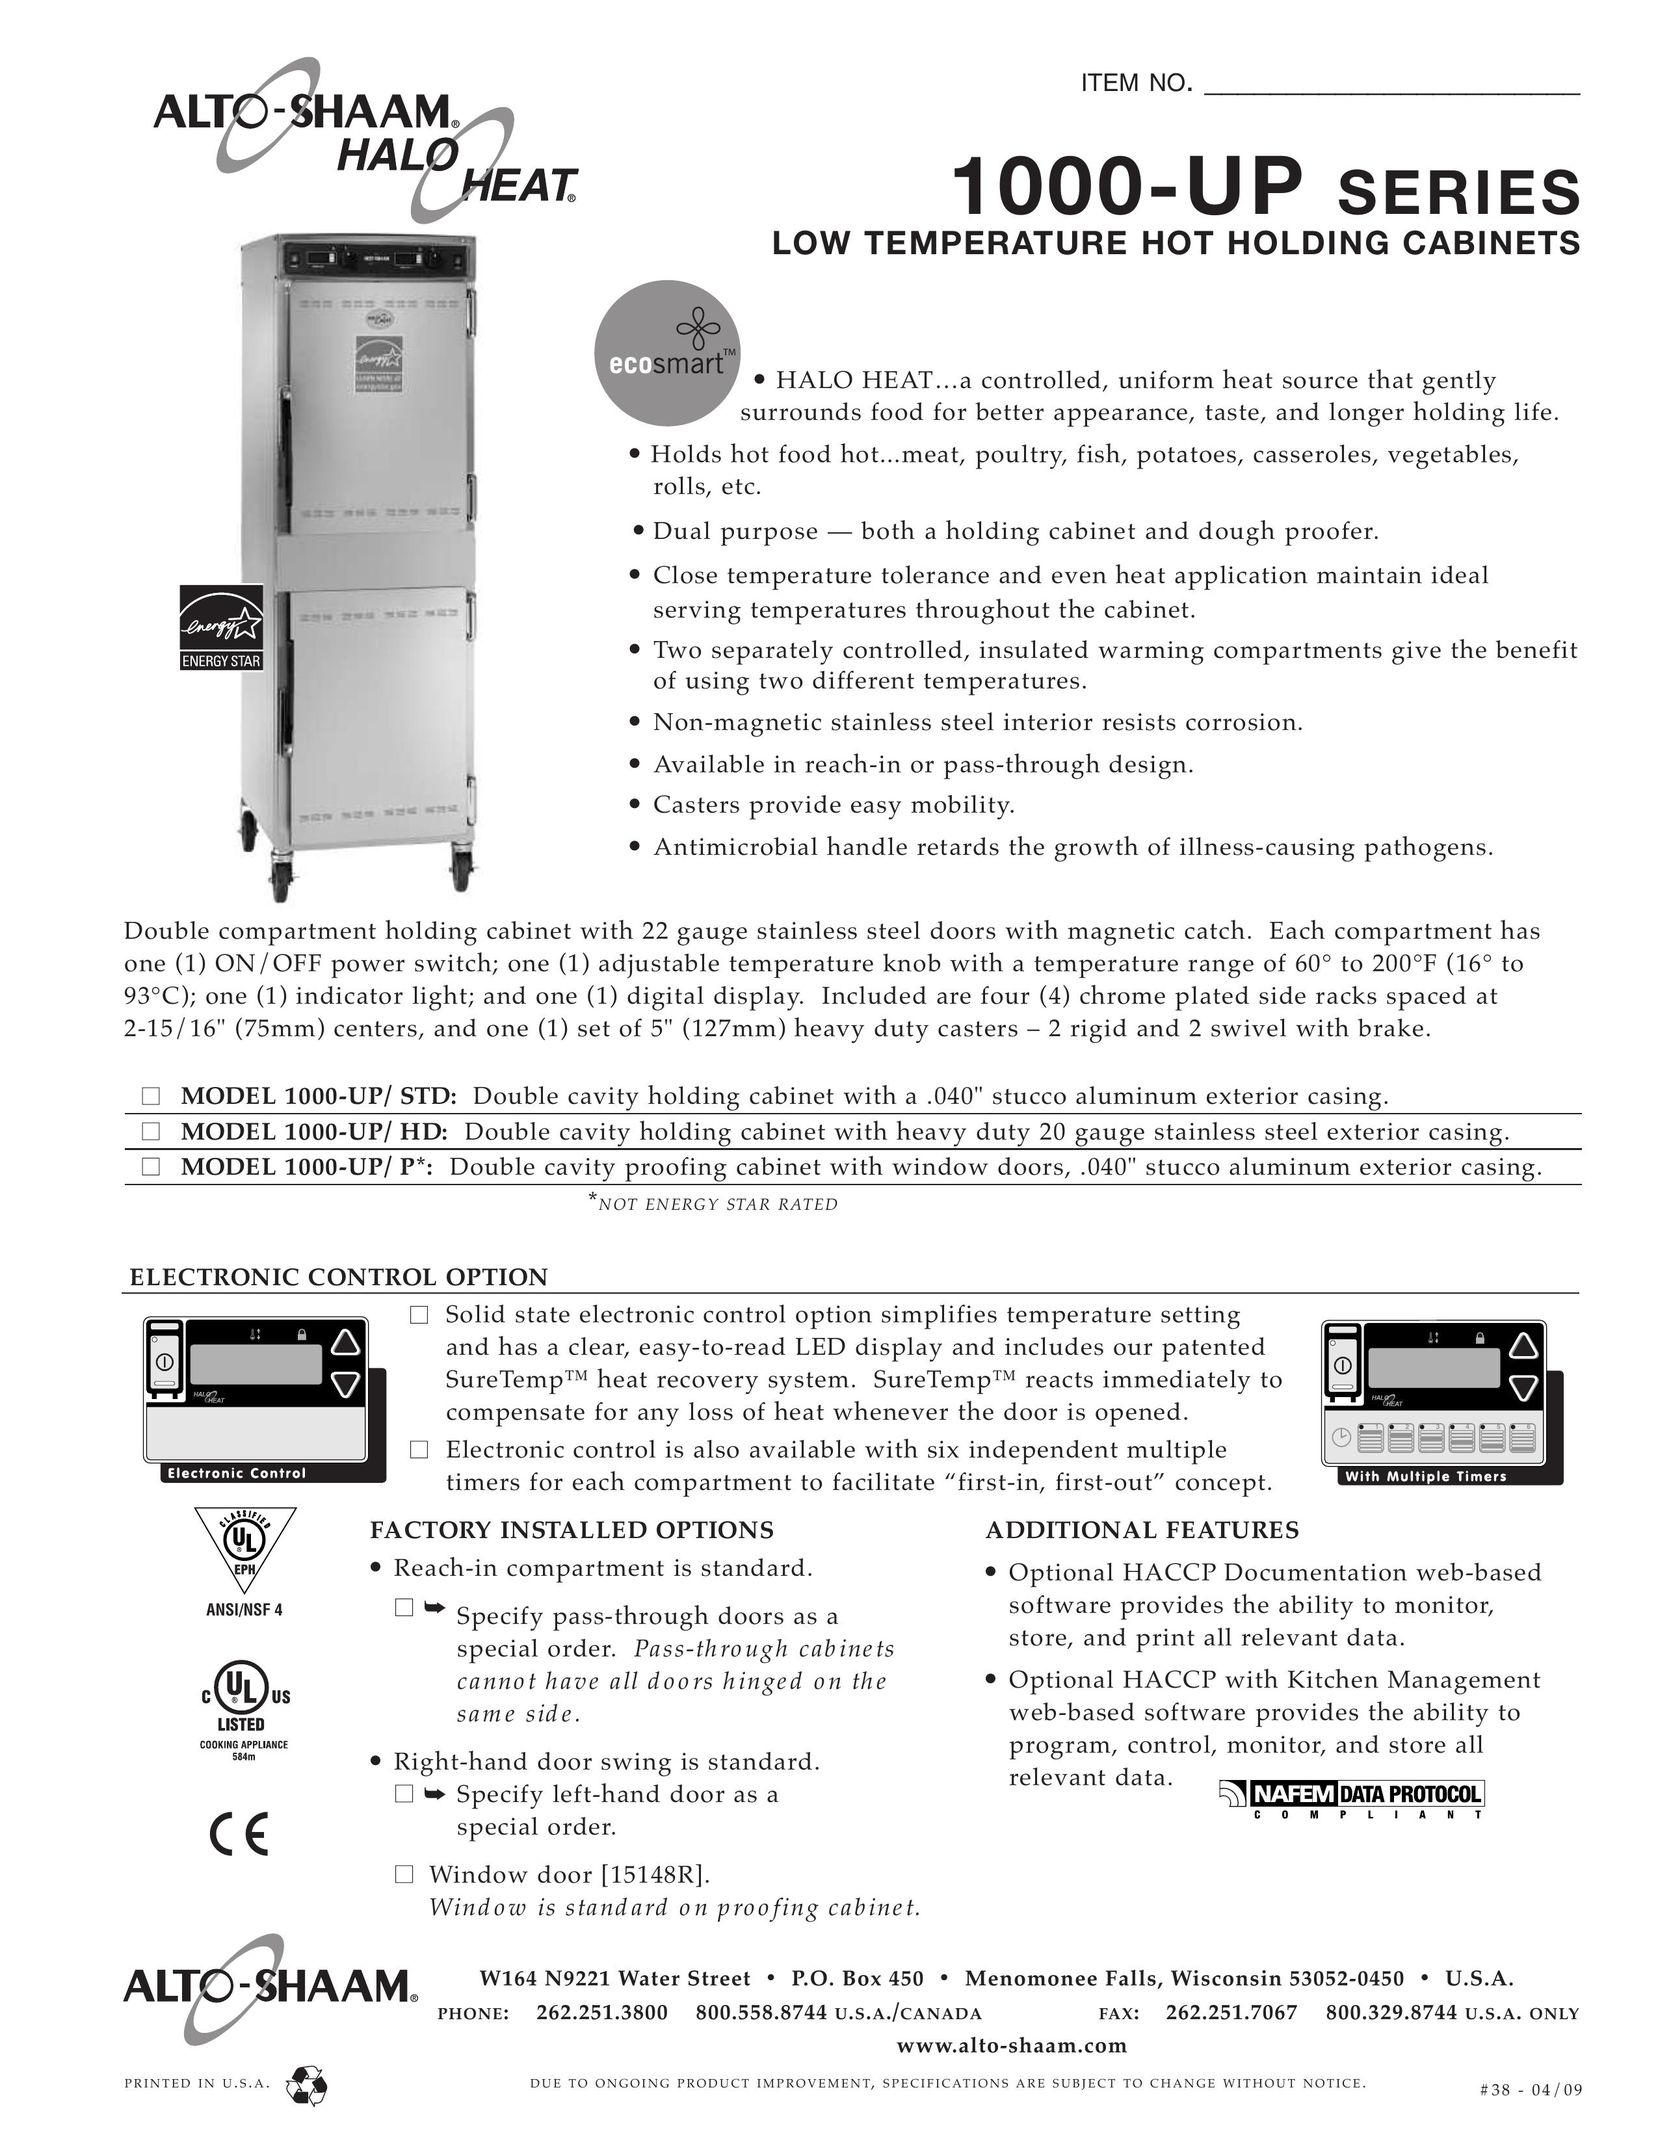 Alto-Shaam 1000-UP/ STD Oven User Manual